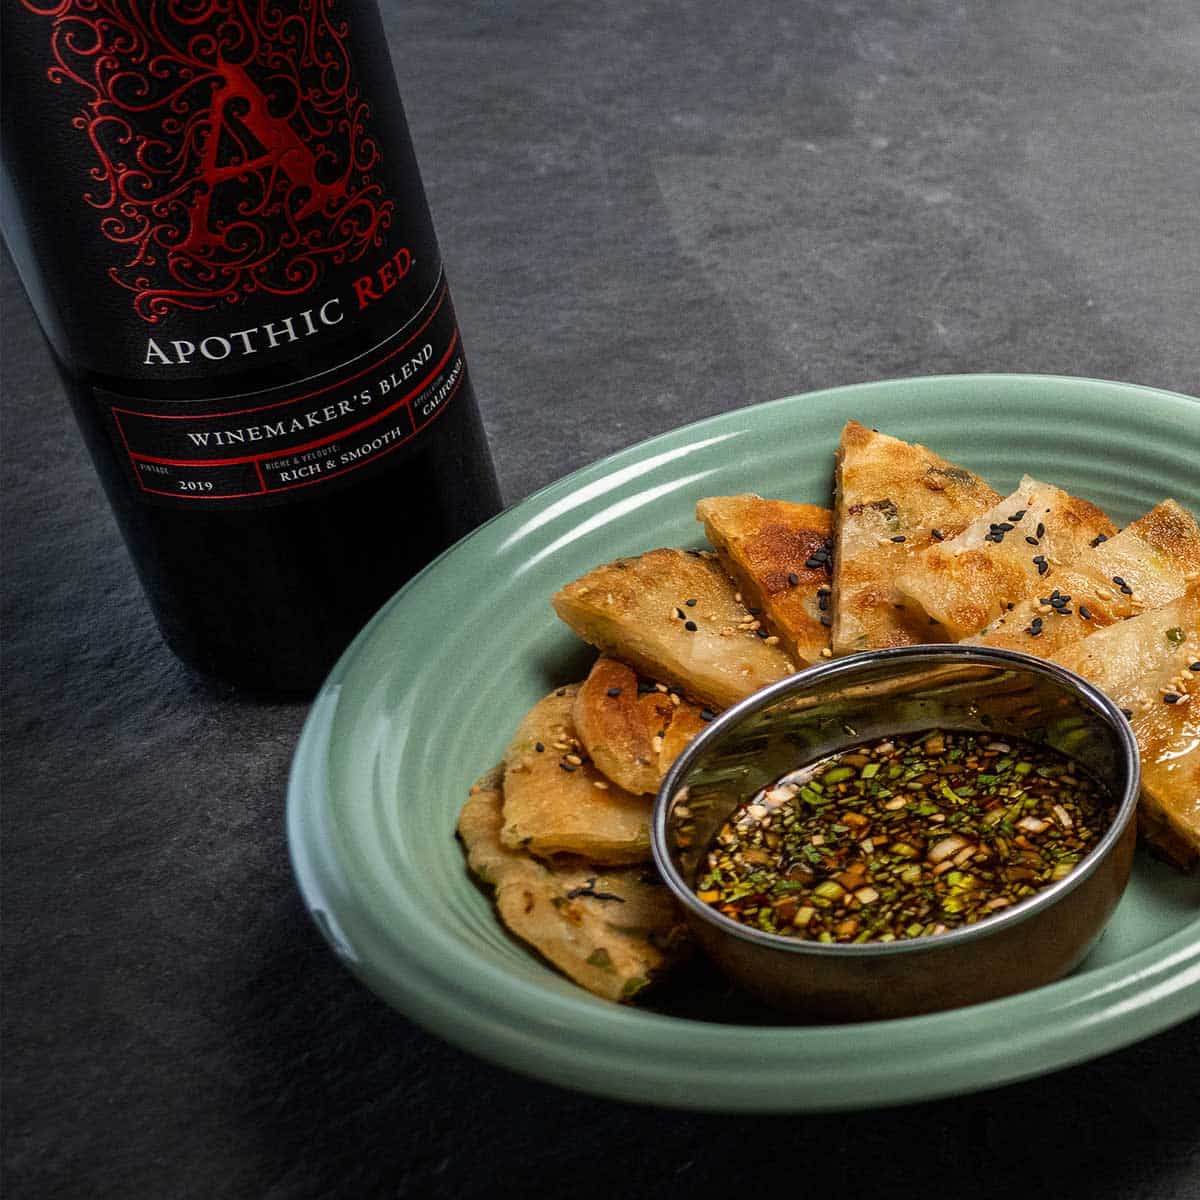 Plate of scallions pancakes with sauce and a bottle of Apothic red